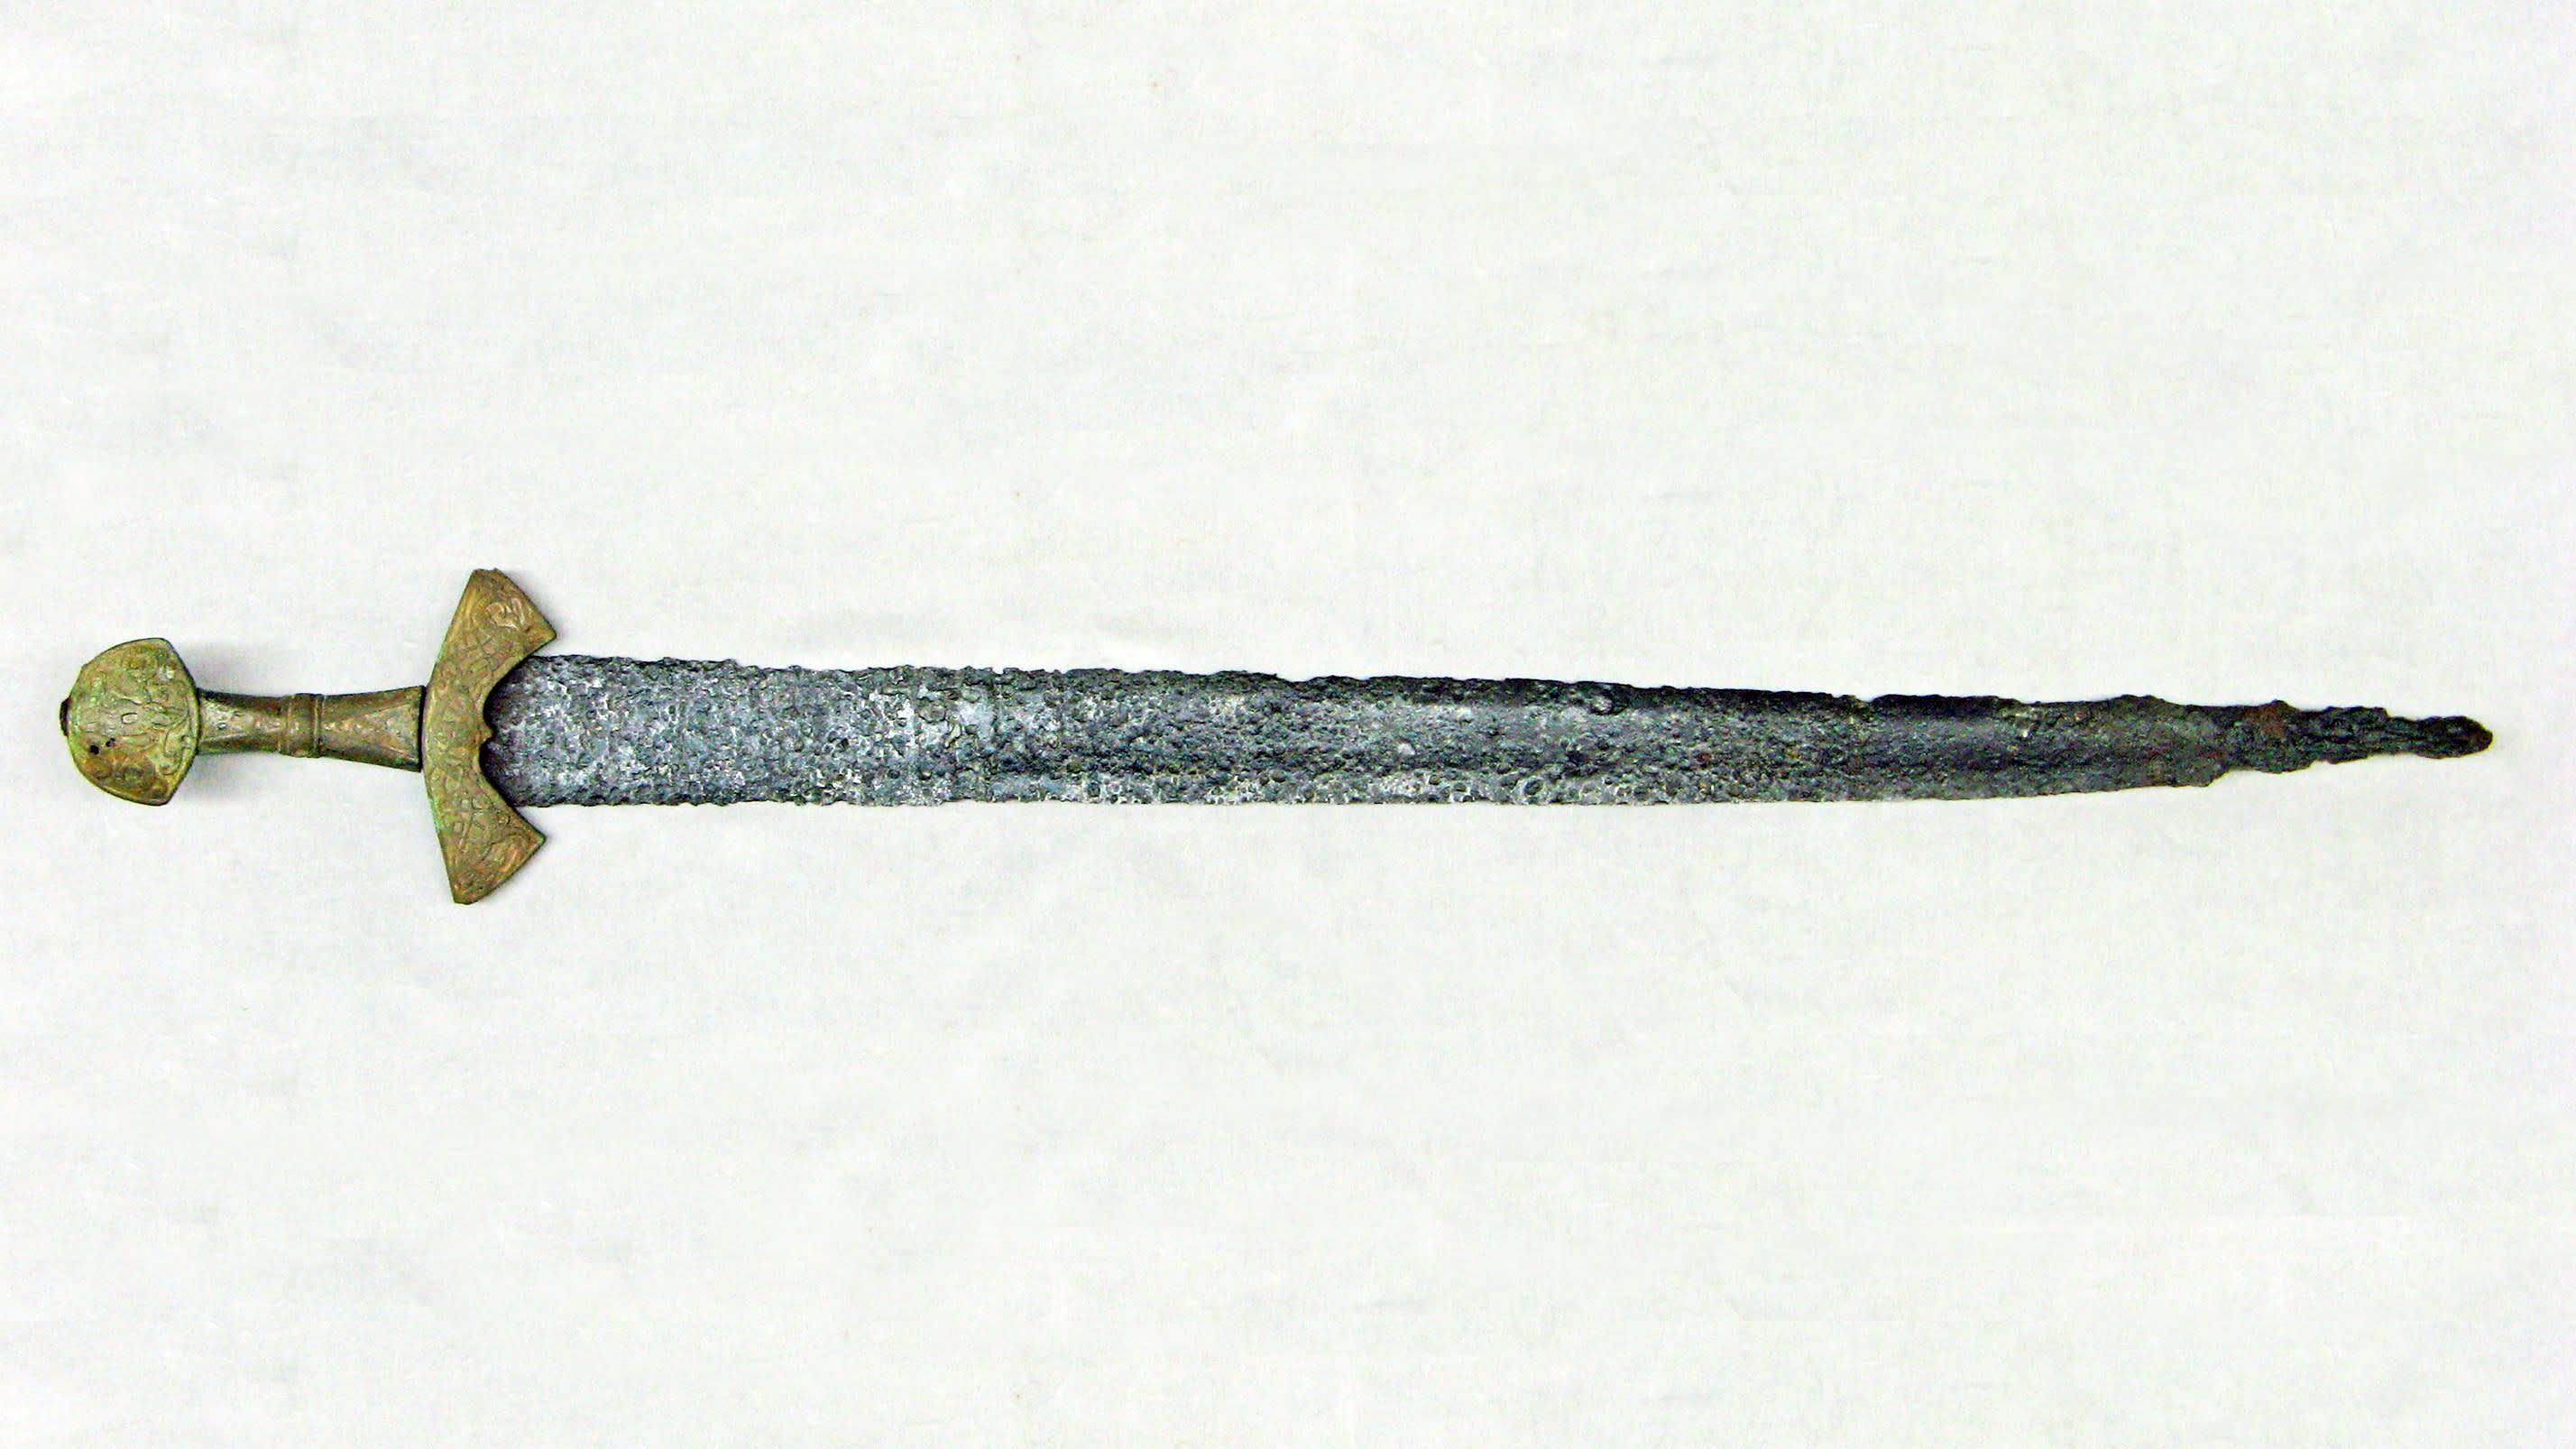 A sword found in a grave in Hattula, Finland, dated between 1040 and 1174. The sword itself is Viking Age (between 800 and 1050) and was placed there later, likely a family heirloom.jpeg